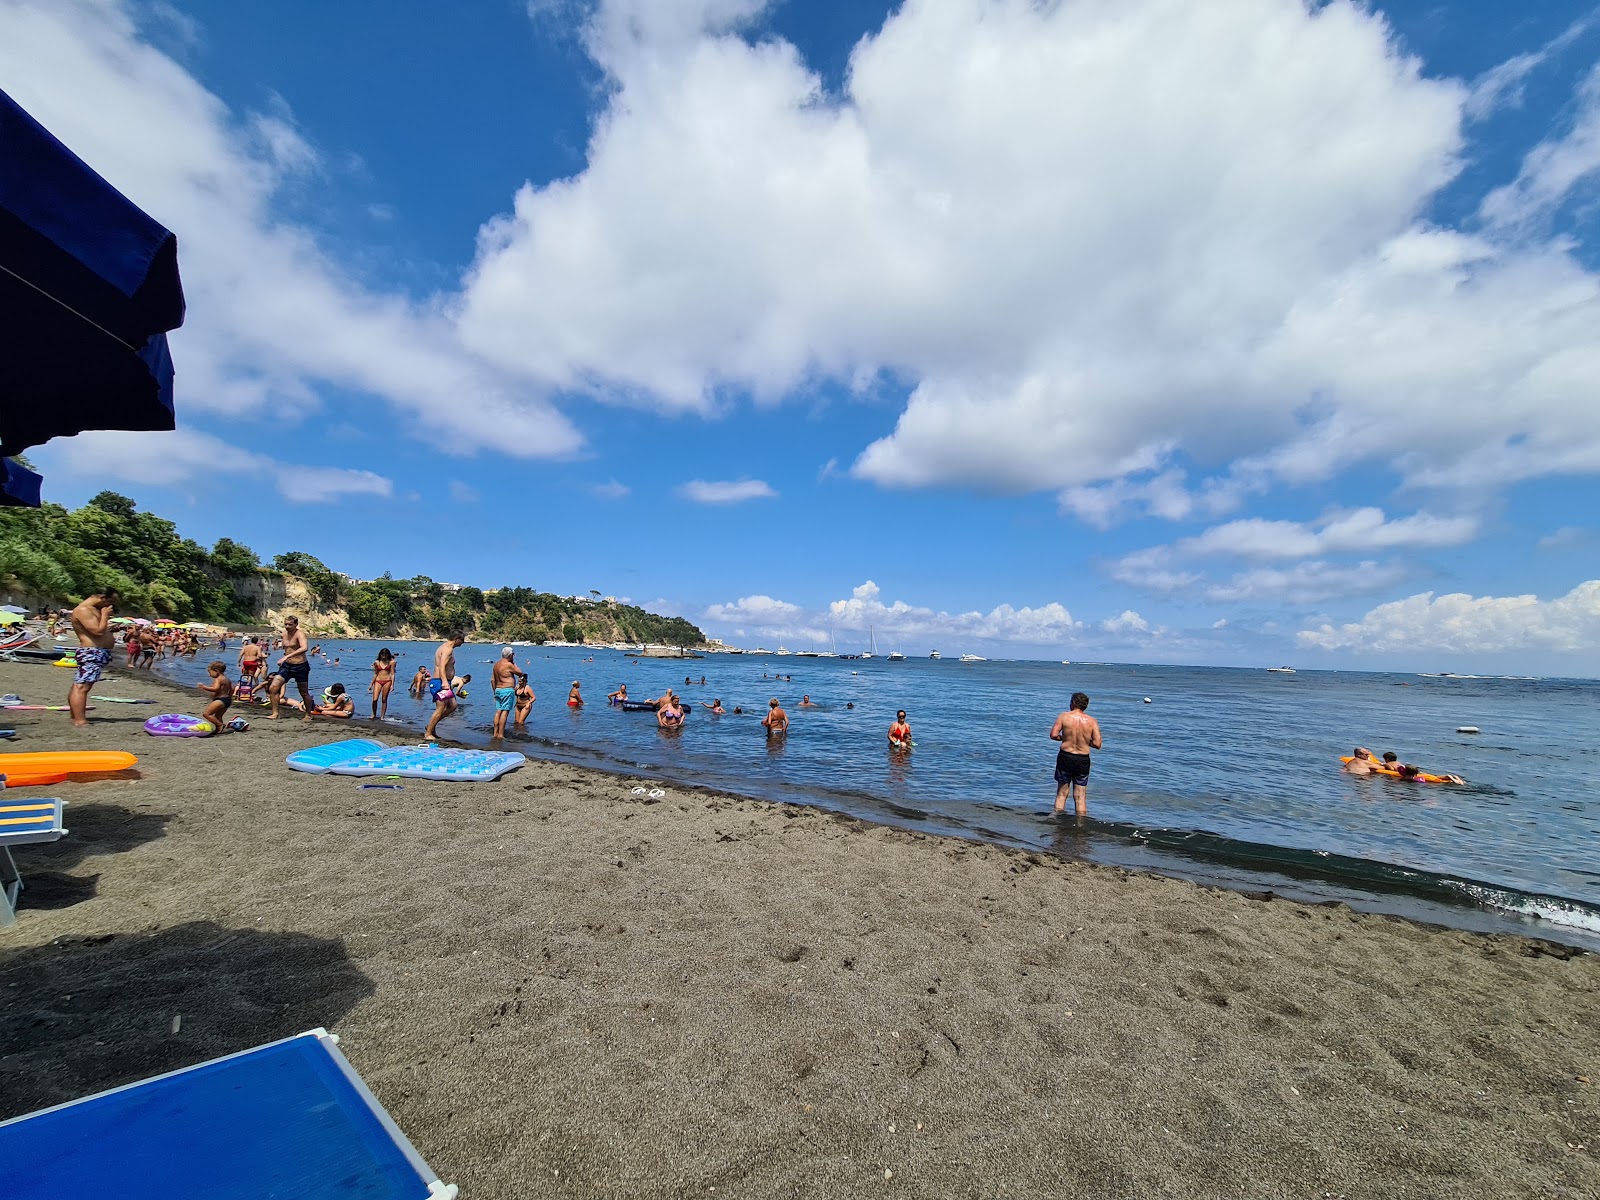 Photo of Spiaggia di Silurenza with blue water surface